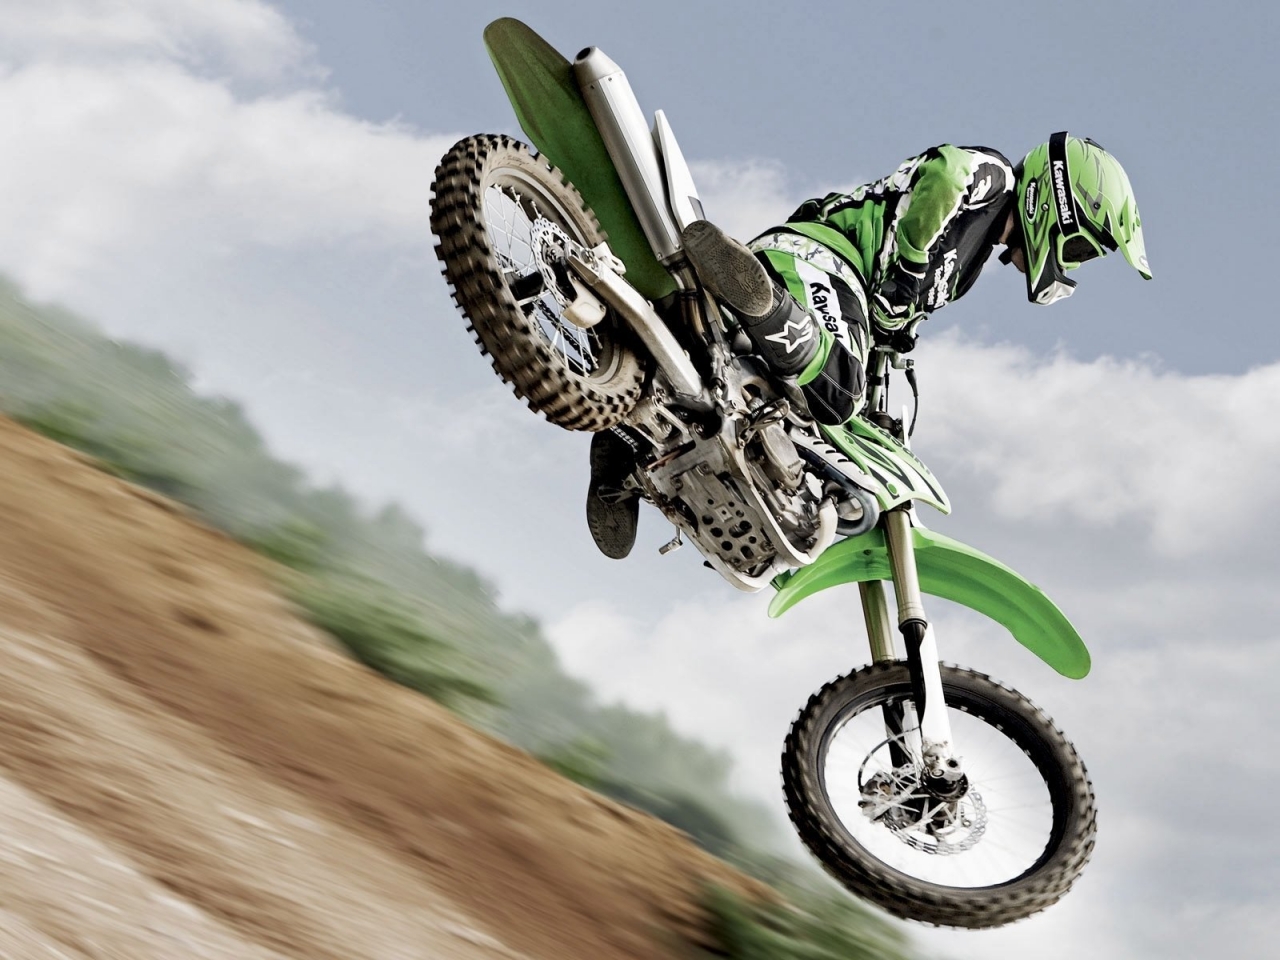 Super Moto Race for 1280 x 960 resolution